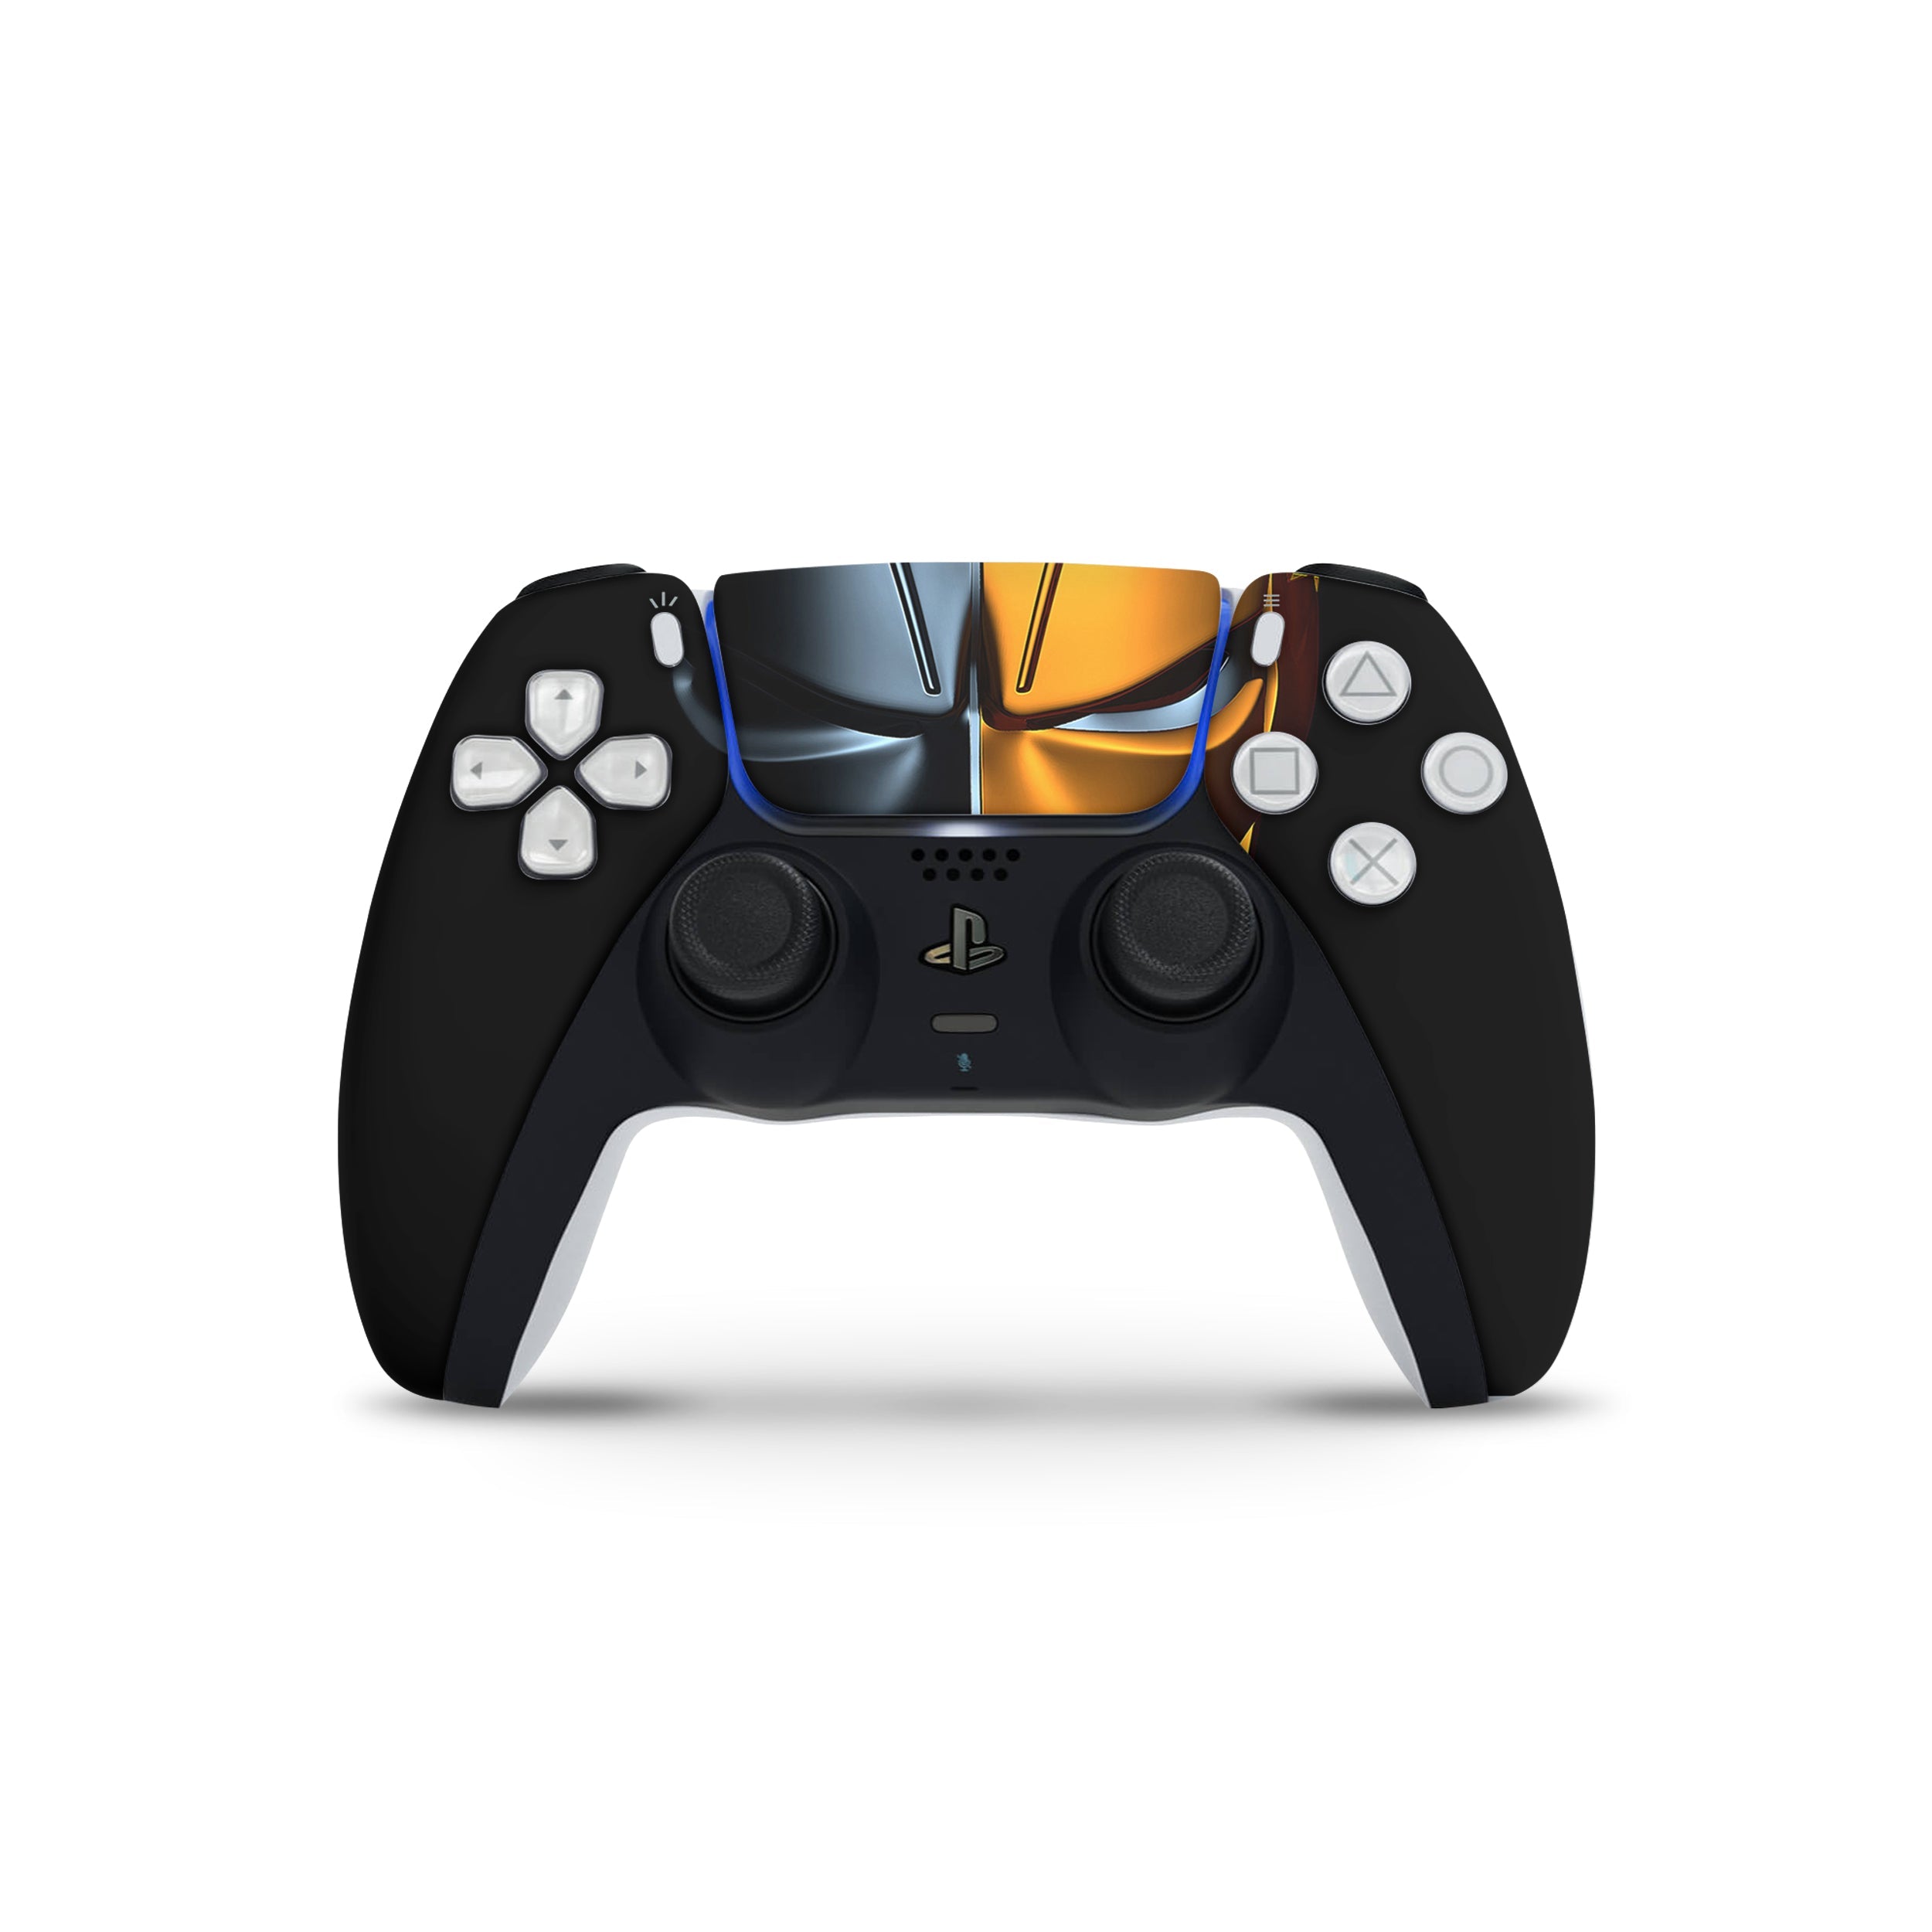 A video game skin featuring a DC Comics Deathstroke design for the PS5 DualSense Controller.